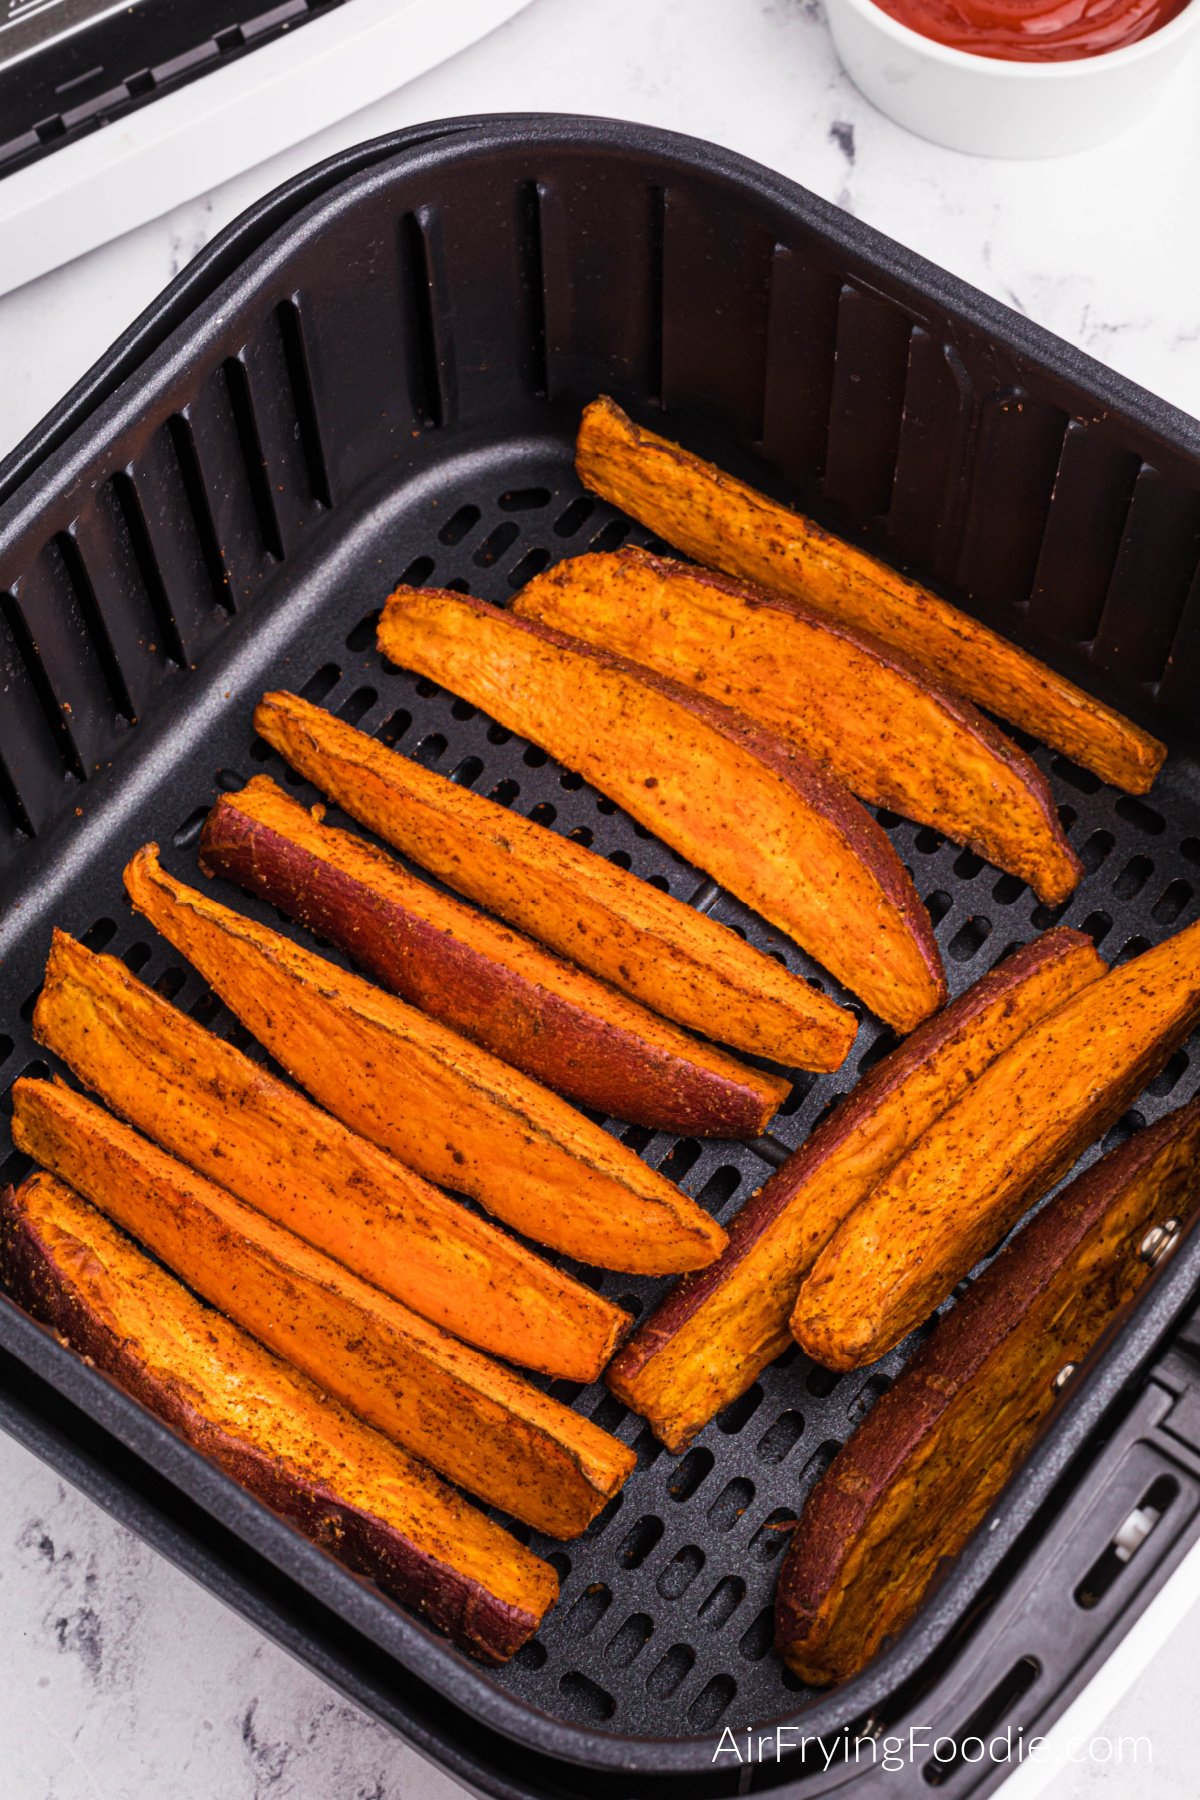 Fully cooked and air fried sweet potato wedges in the air fryer basket.